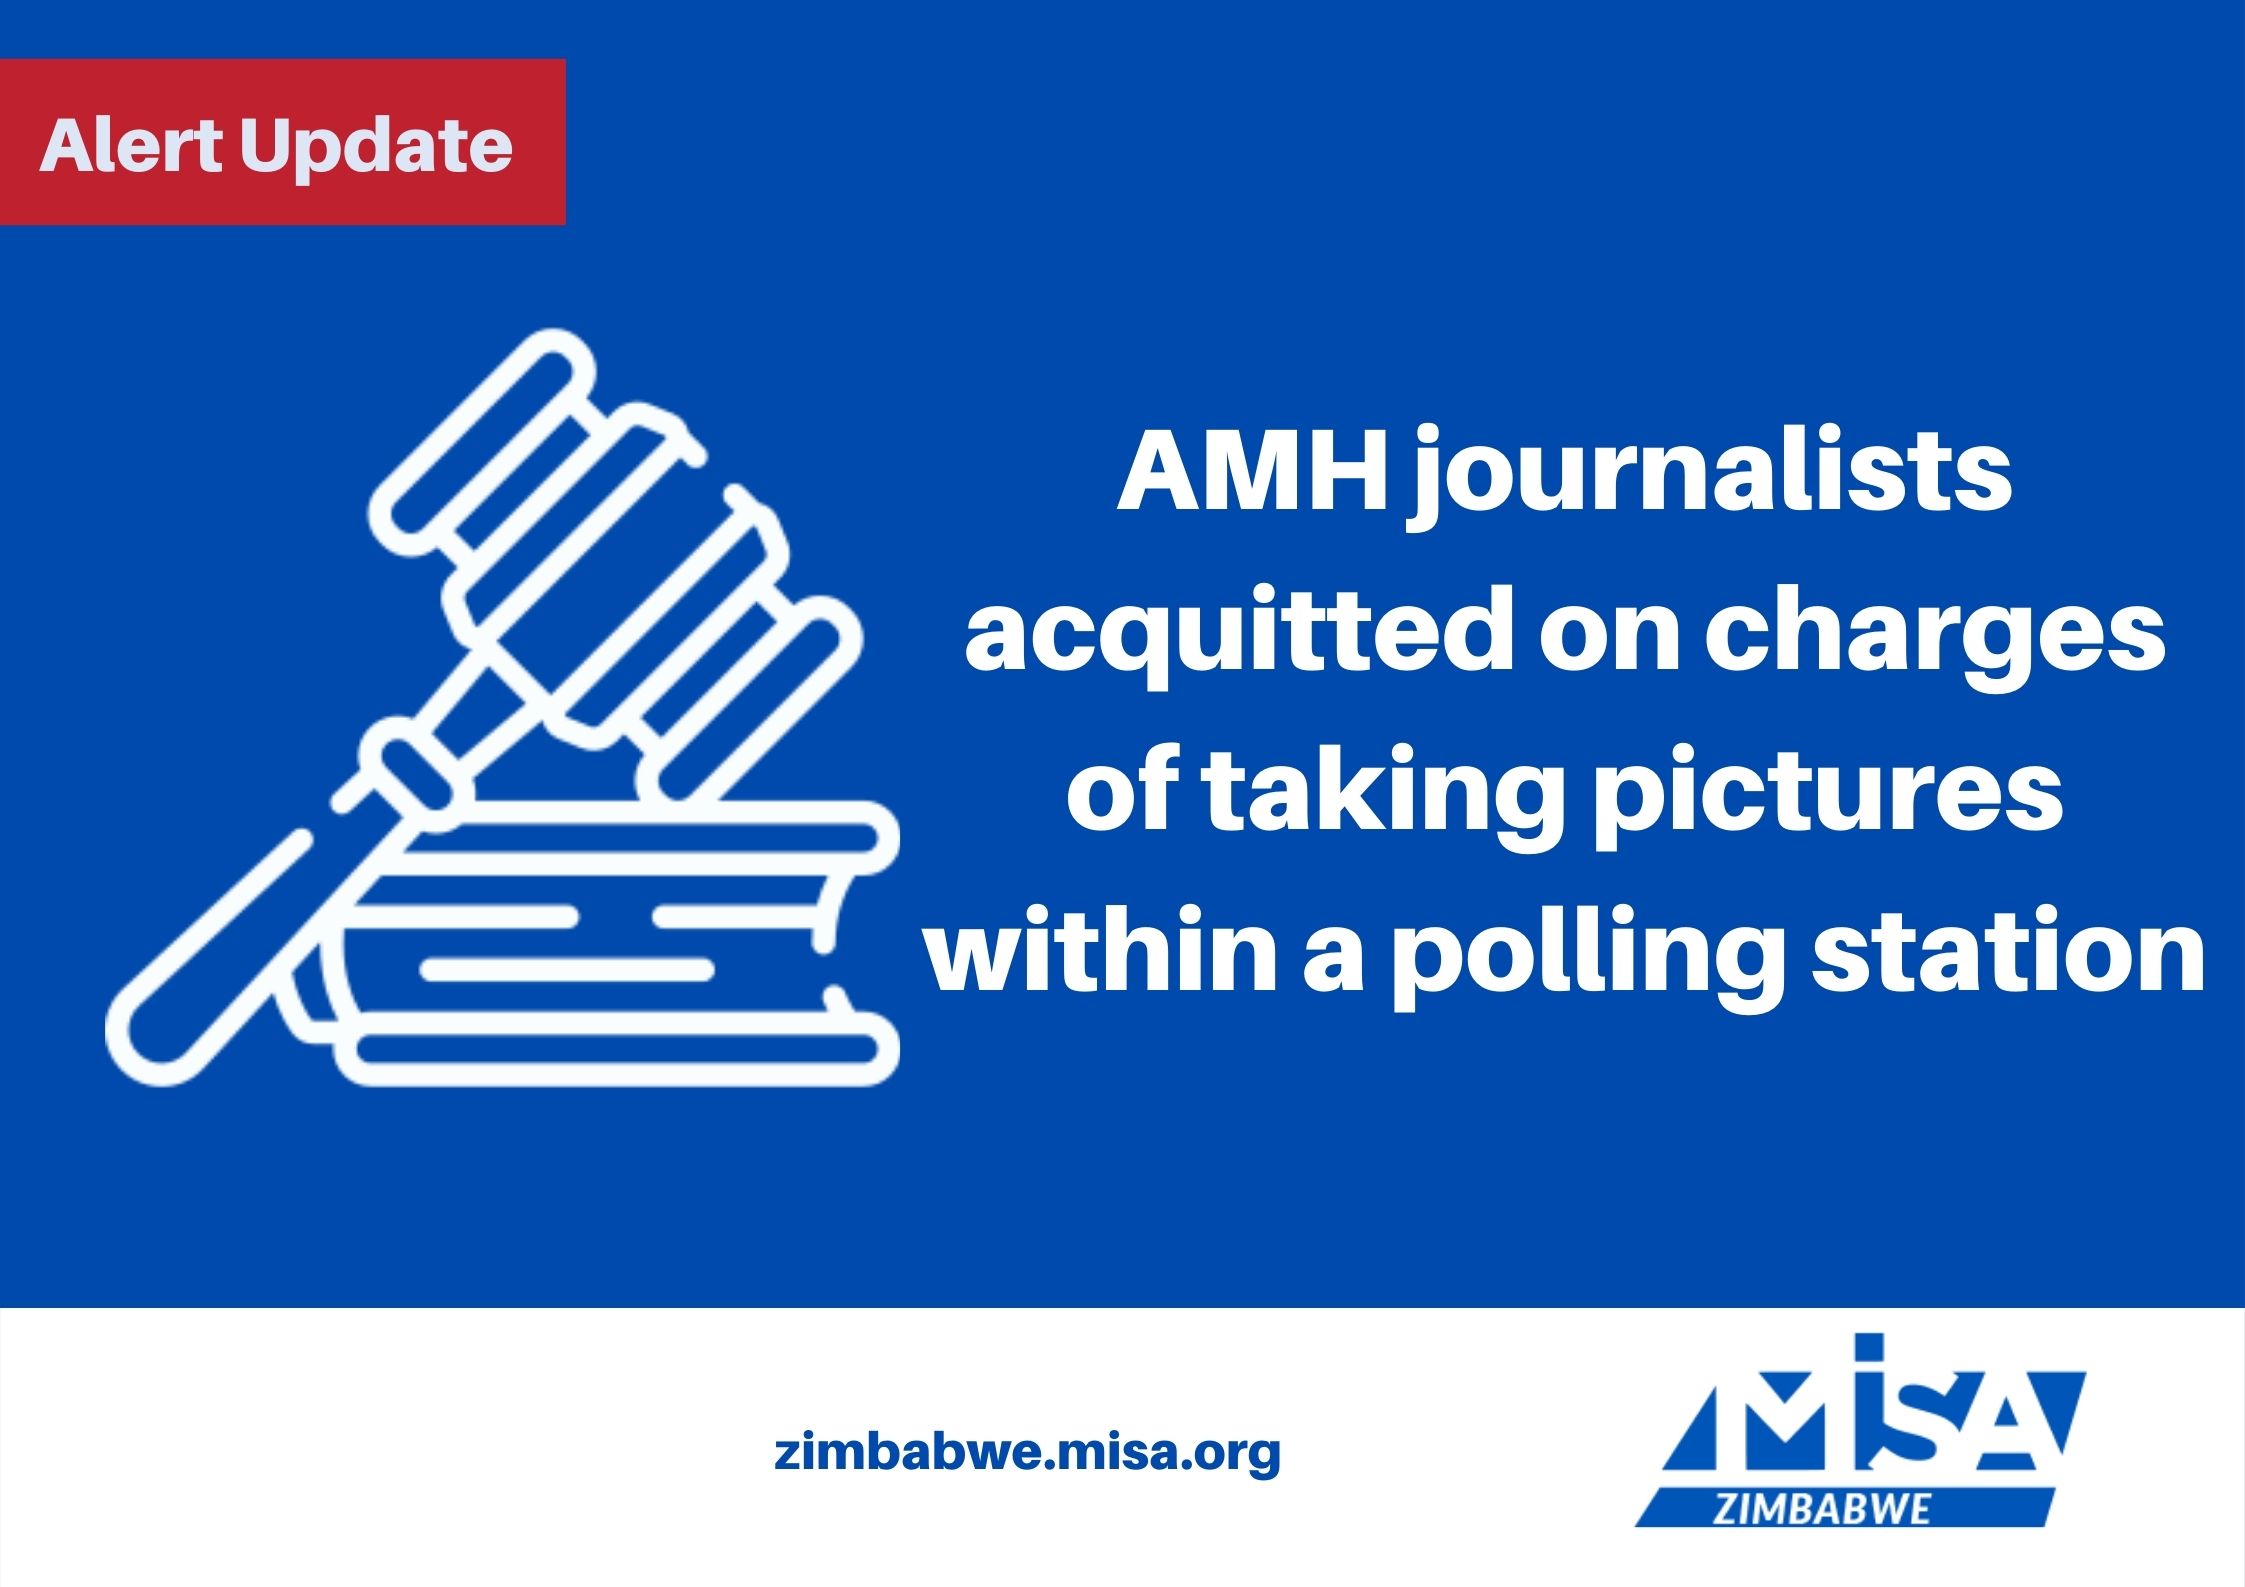 AMH journalists acquitted on charges of taking pictures within a polling station